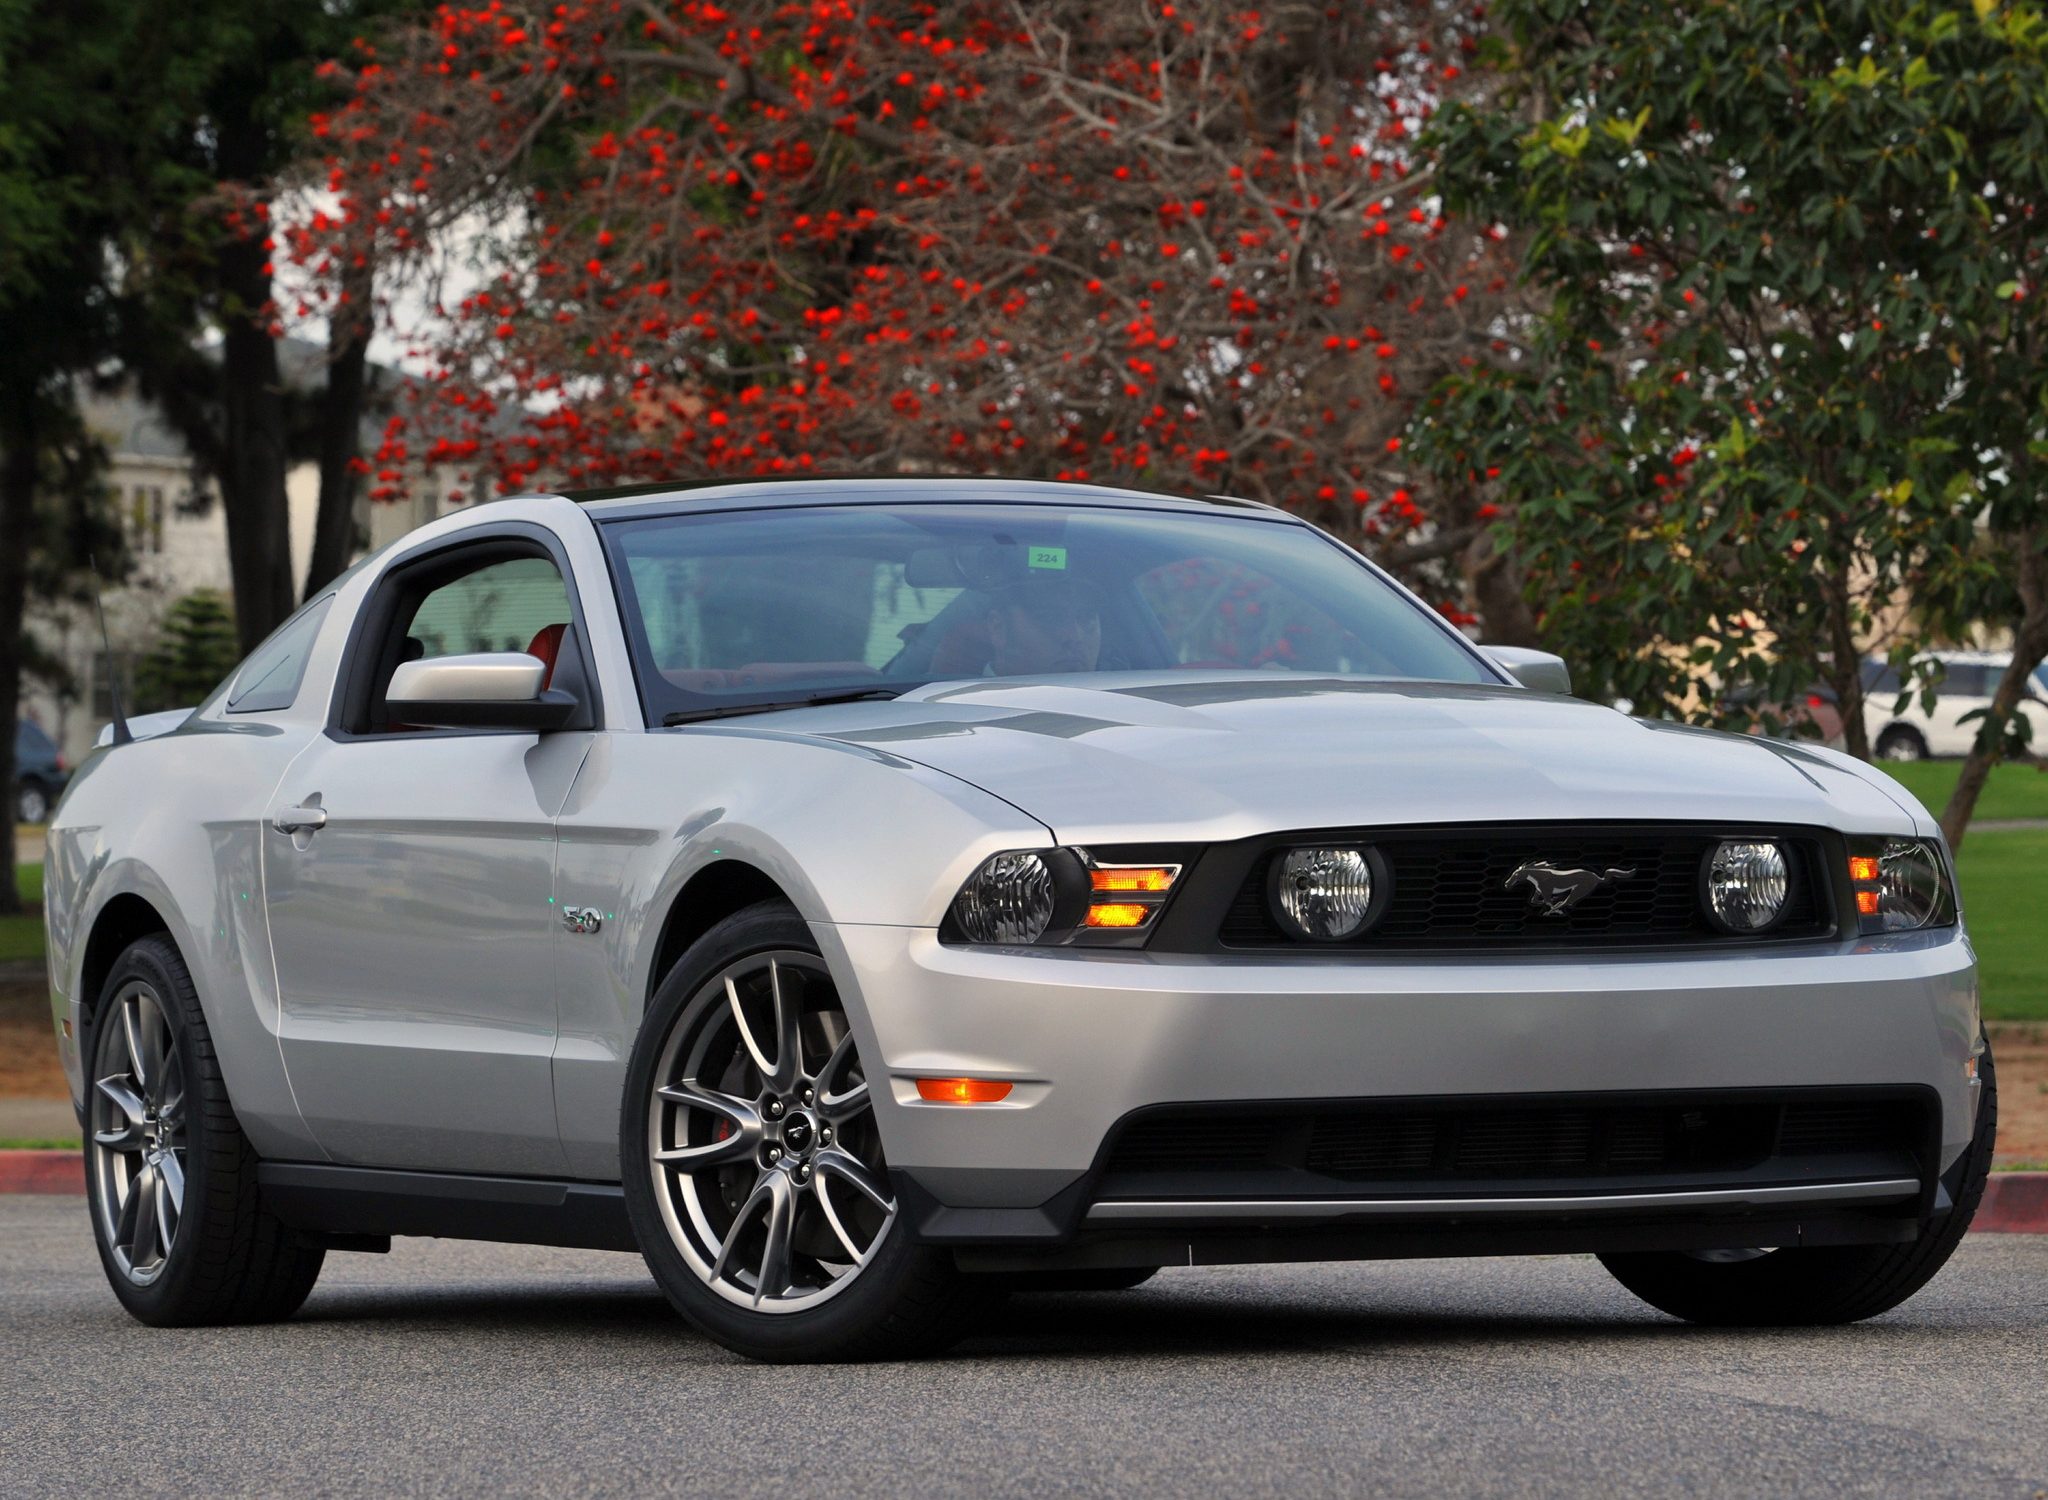 Mustang Of The Day: 2010 Ford Mustang GT